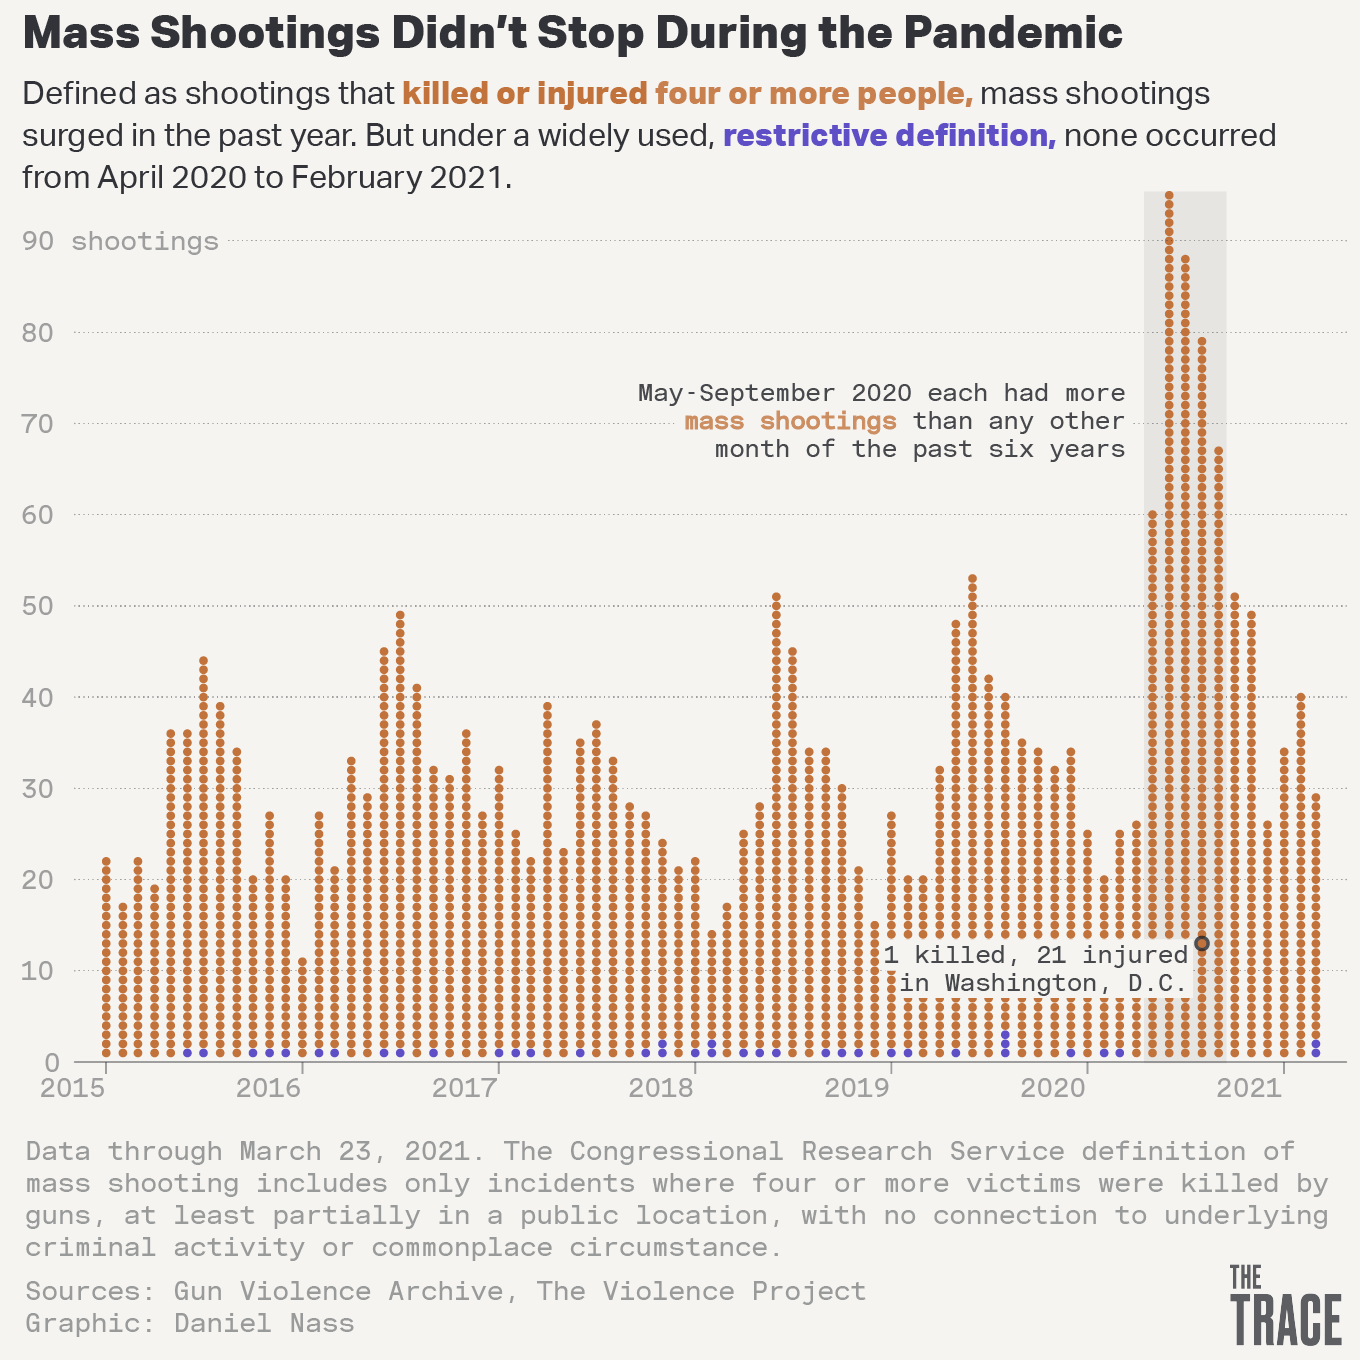 A headline reads "Mass Shootings Didn't Stop During the Pandemic," with the subheadline "Defined as shootings that killed or injured four or more people, mass shootings surged in the past year. But under a widely used, restrictive definition, none occurred from April 2020 to February 2021." Below it is a month by month bar graph showing the number of shooting incidents under both definitions from 2015 through 2021. Under the broader definition, most years have peak monthly number of shootings in the low 50s or below, but a highlighted peak in 2020 goes up past 90 shootings, with the caption  "May–September 2020 each had more mass shootings than any other month of the past six years." 